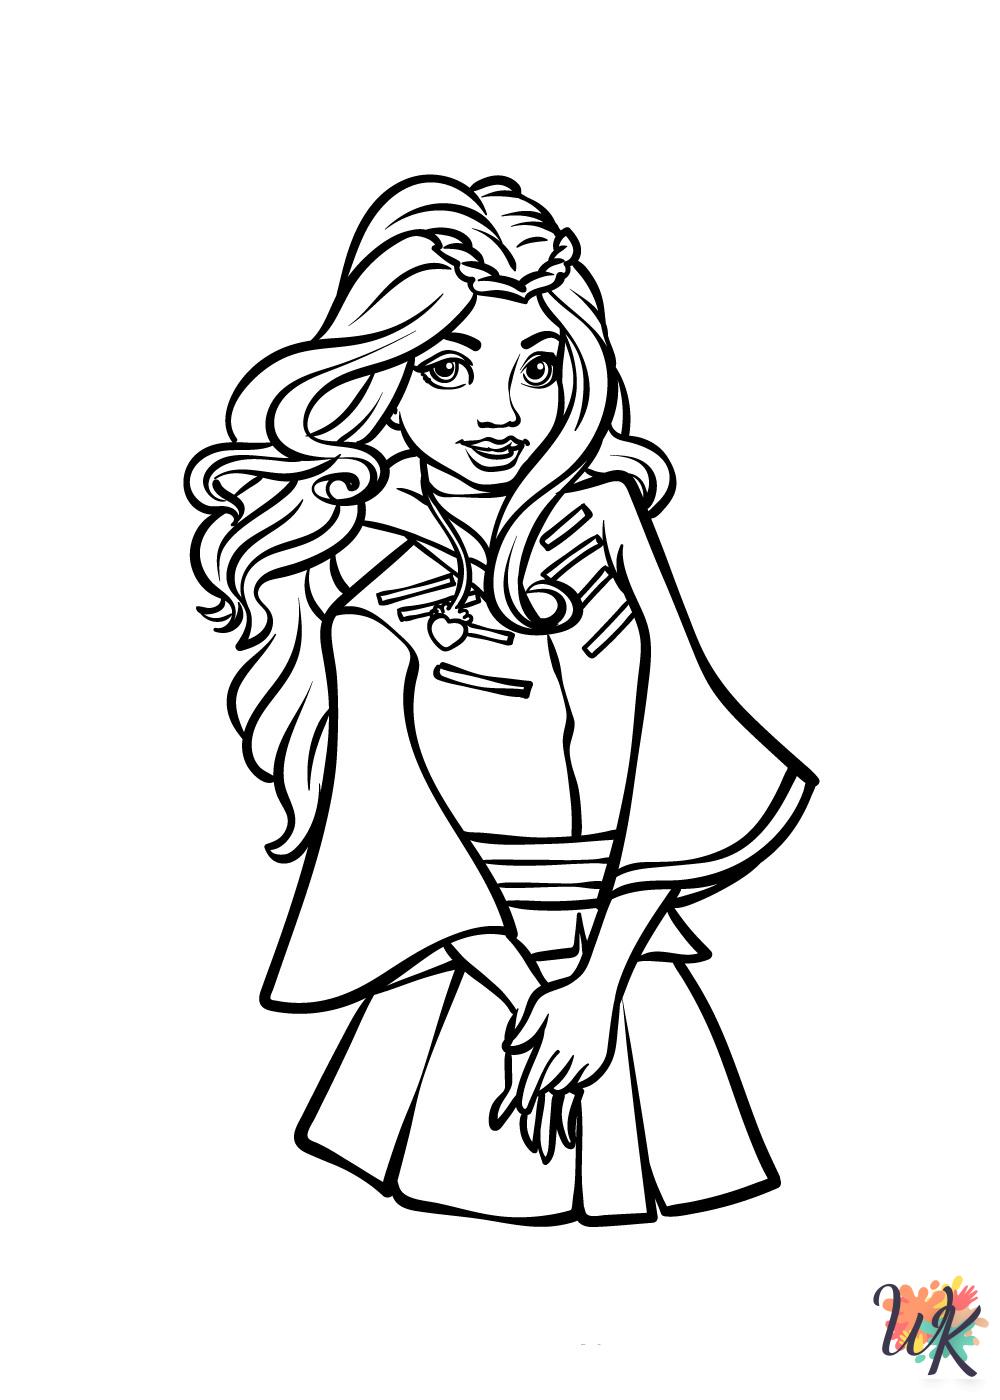 Descendants themed coloring pages